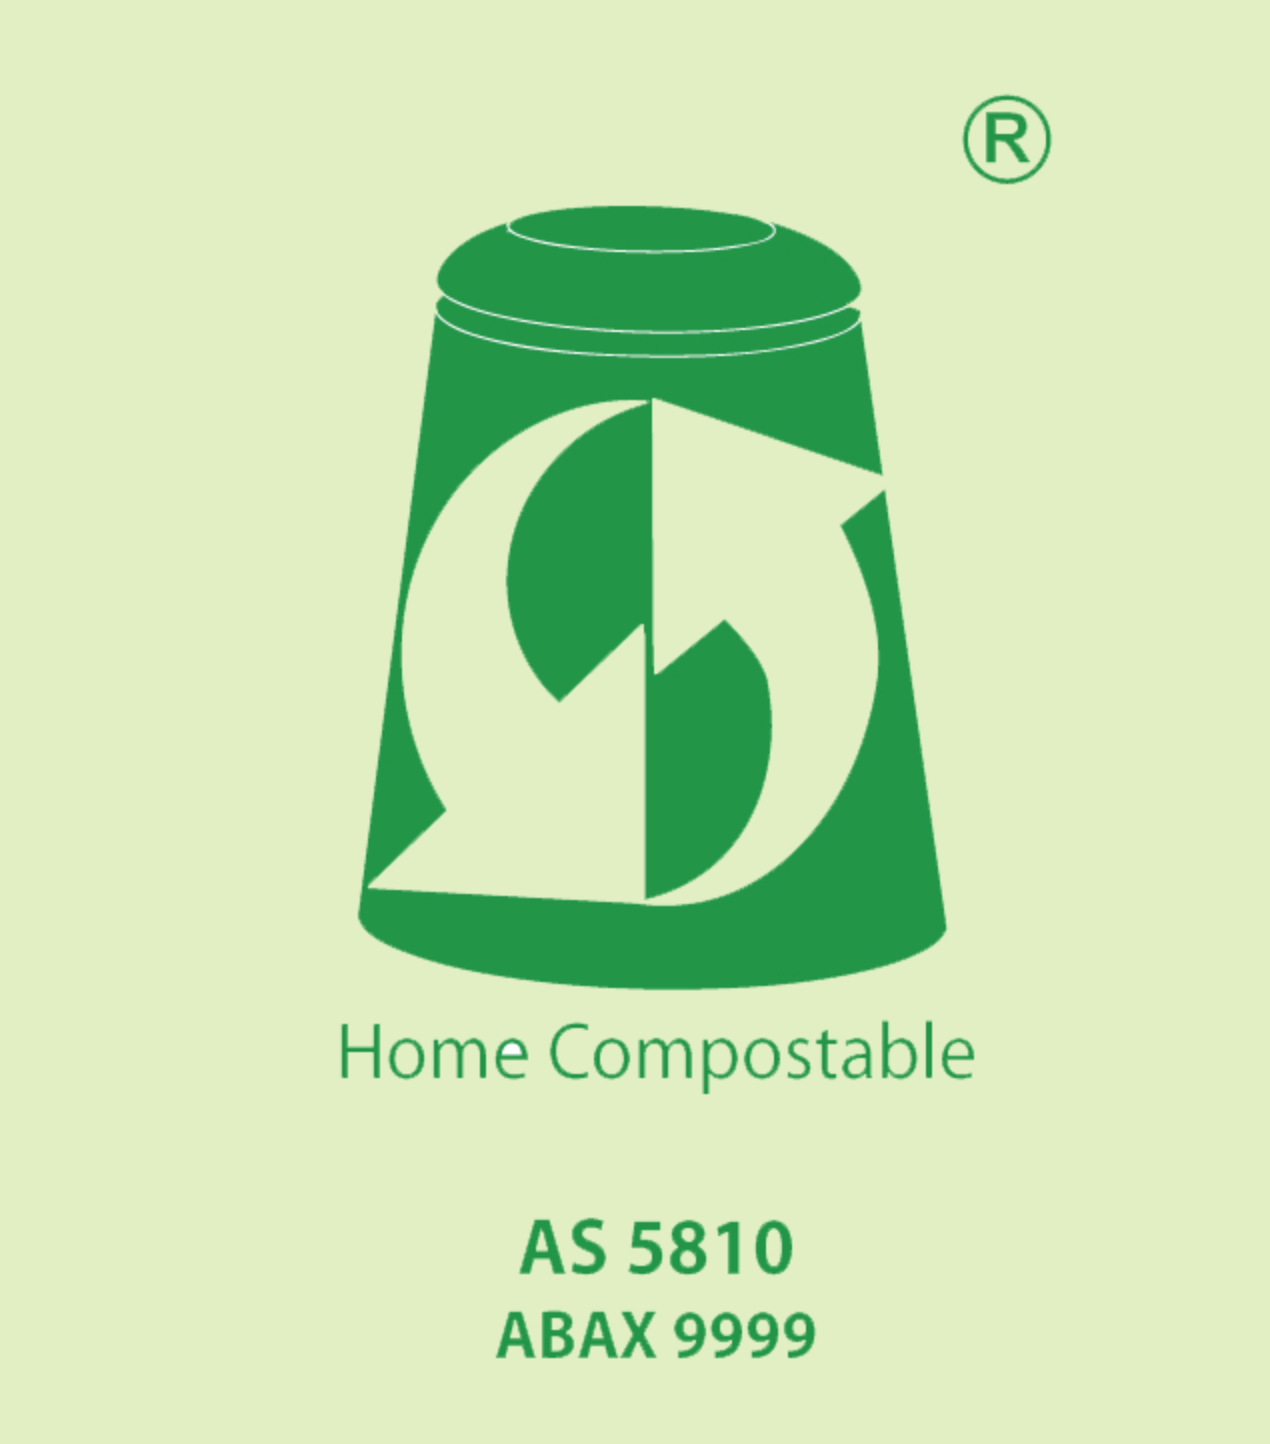 ABA Home Compostable Certification Symbol 